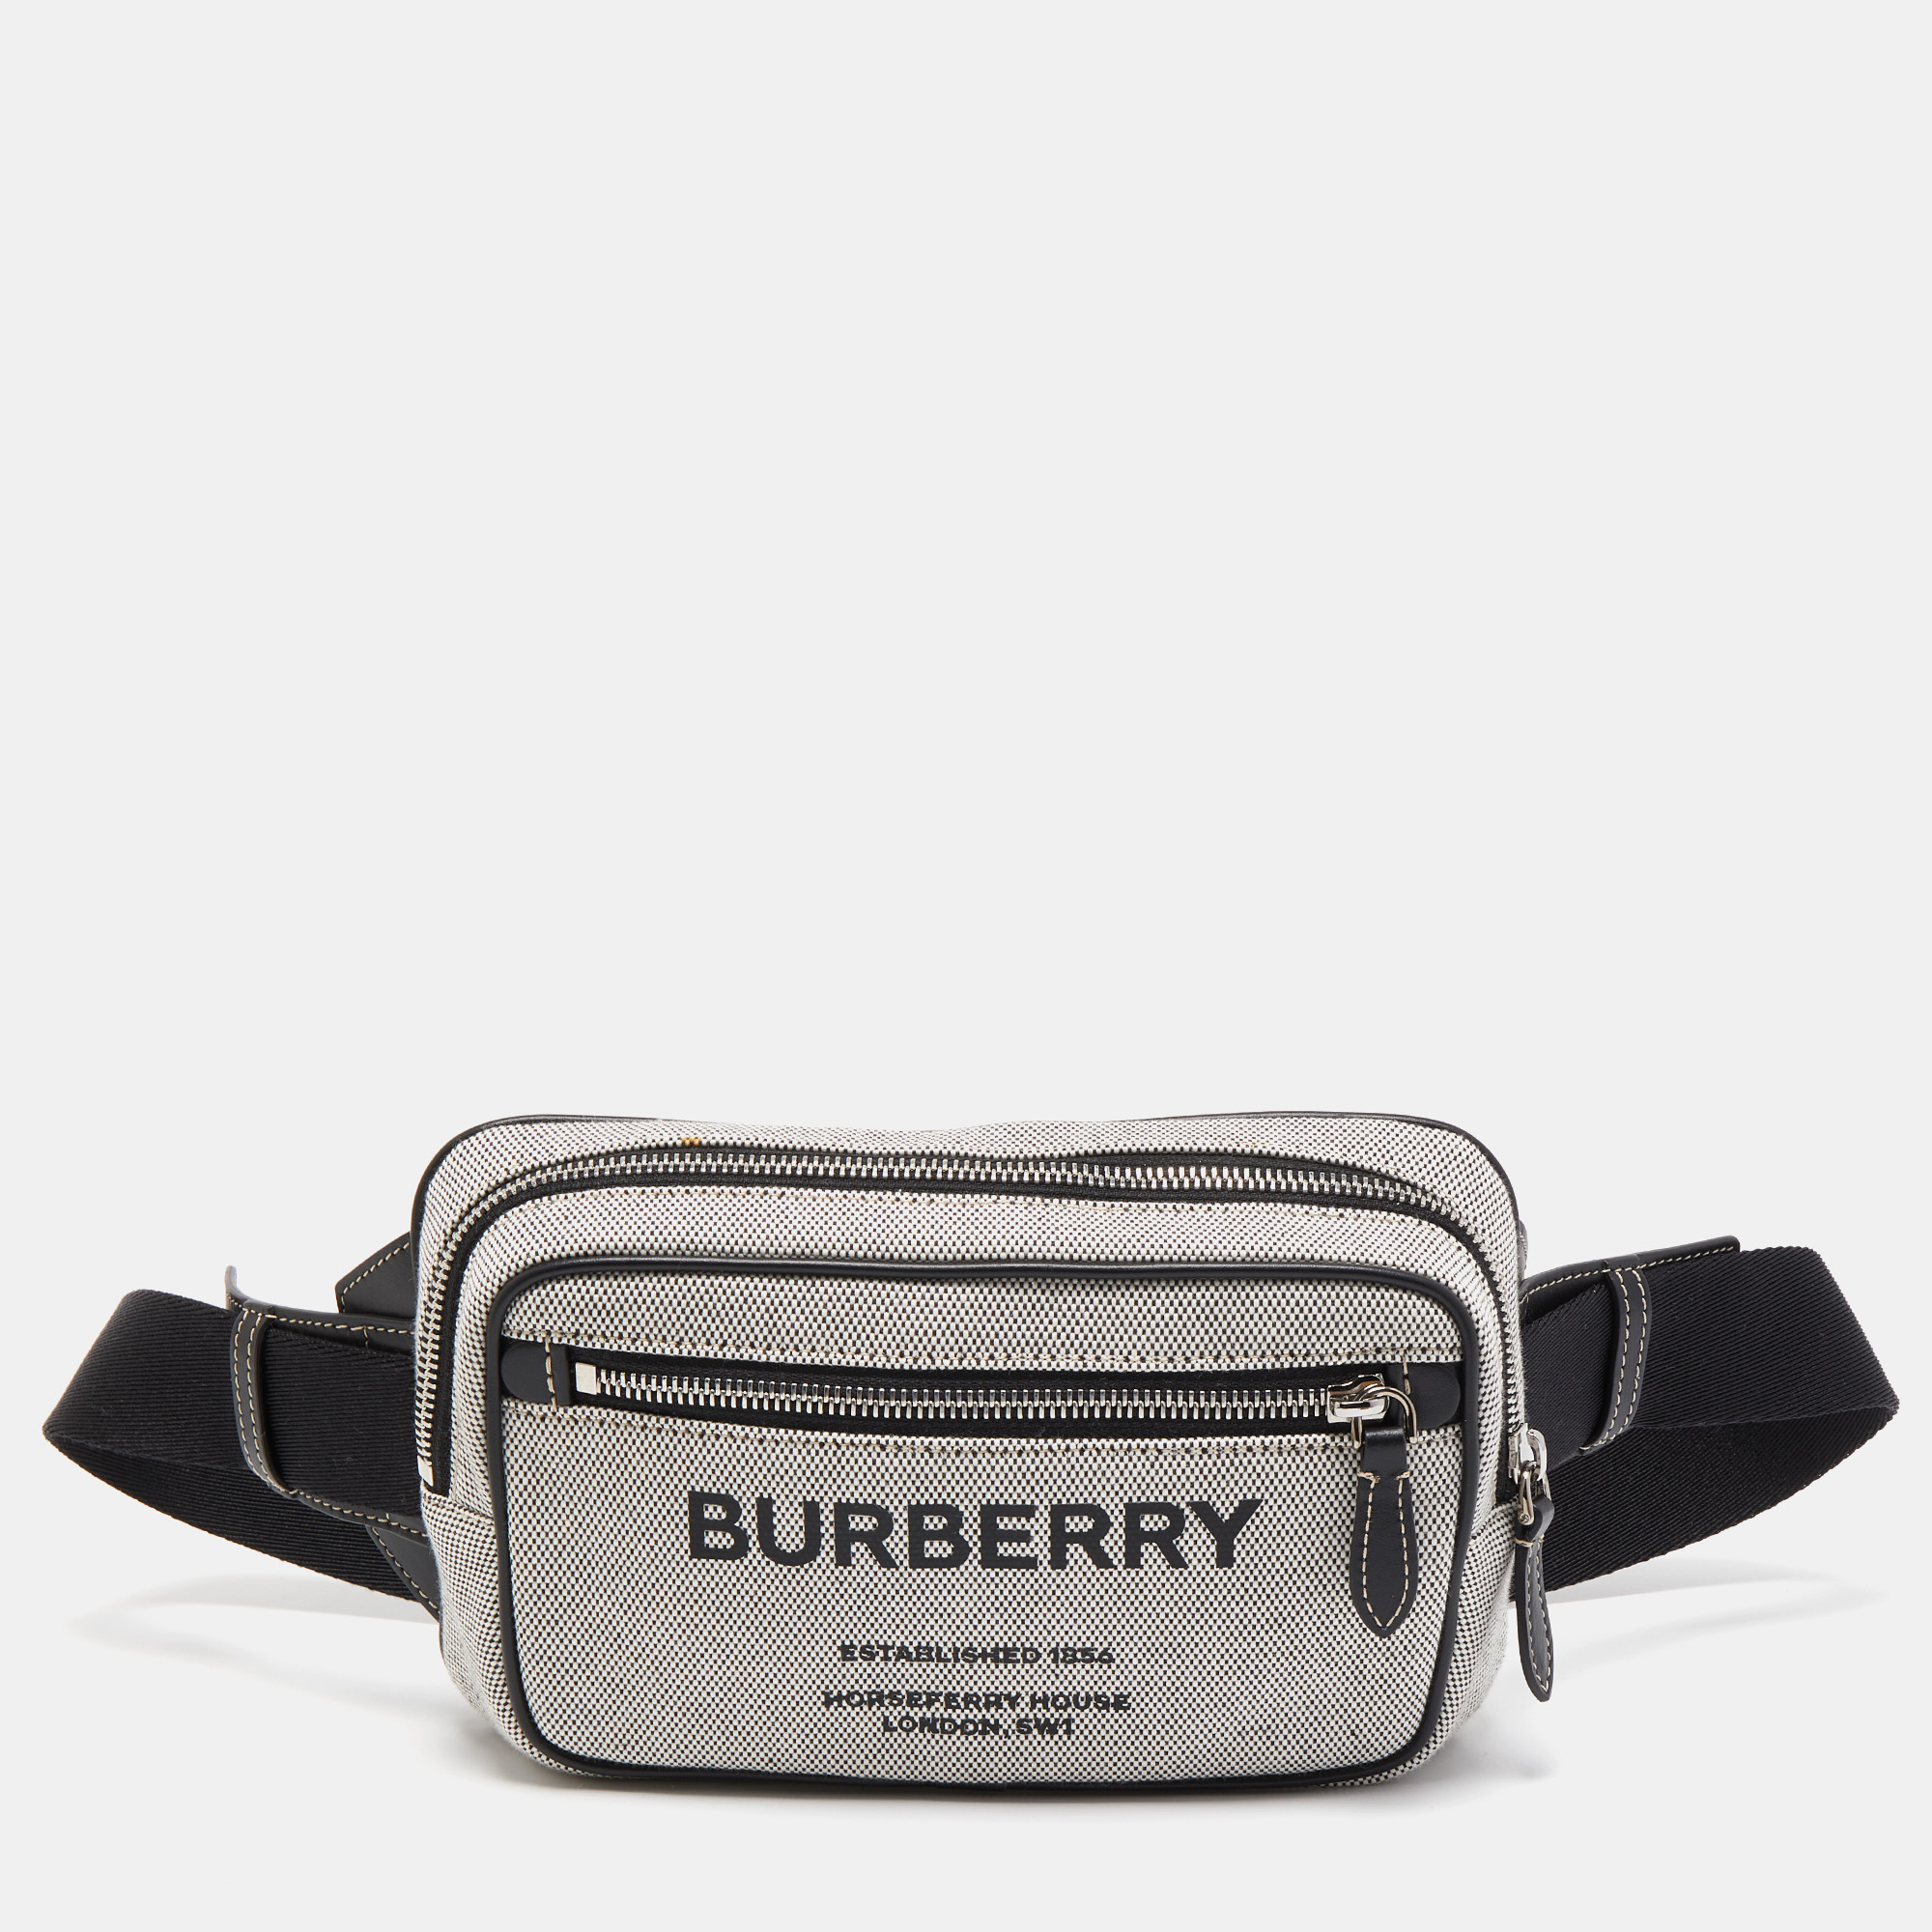 Burberry Grey/Black Canvas and Leather West Belt Bag Burberry | TLC